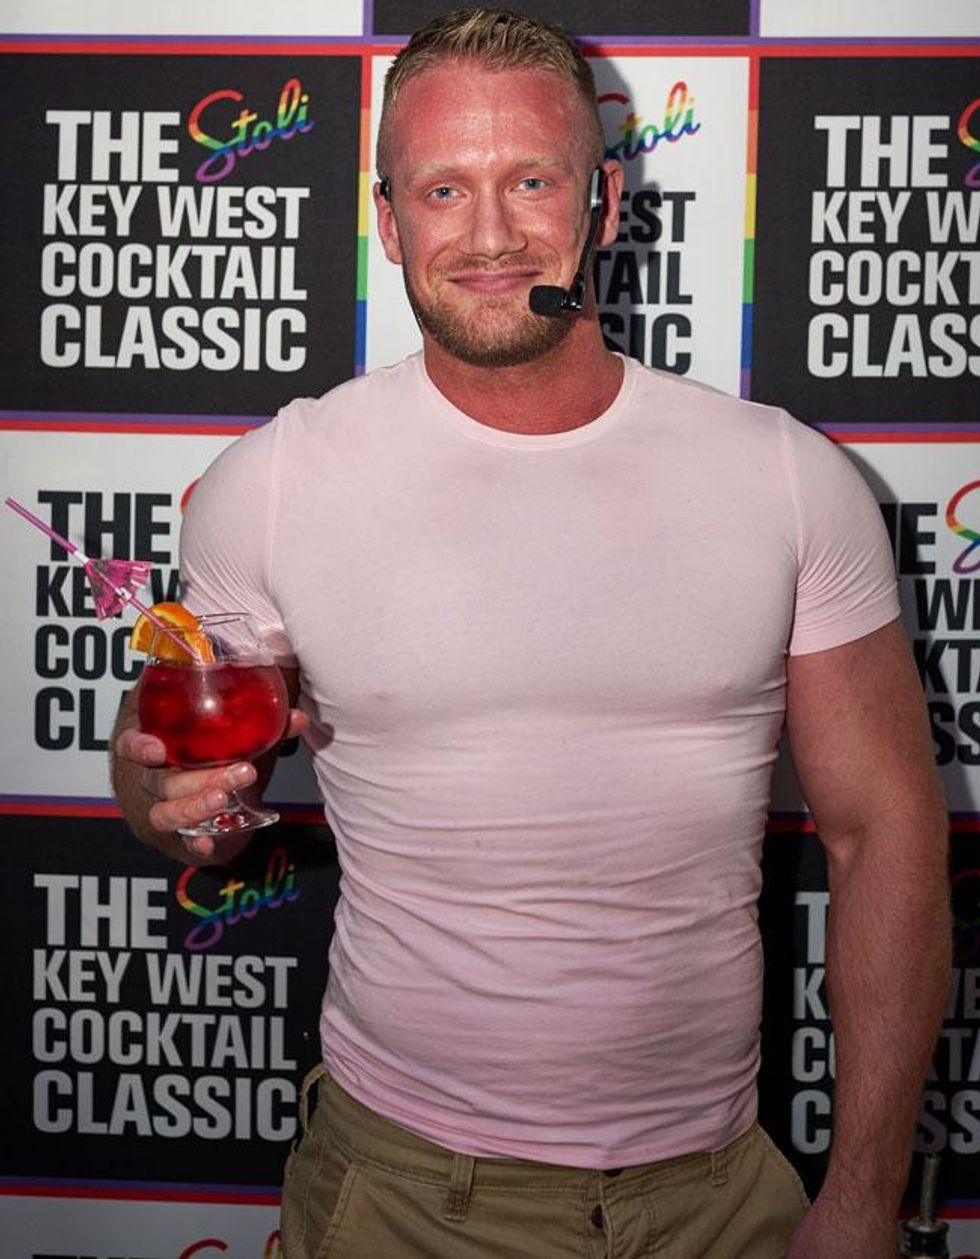 The 2017 Stoli Key West Cocktail Classic Event in Vancouver